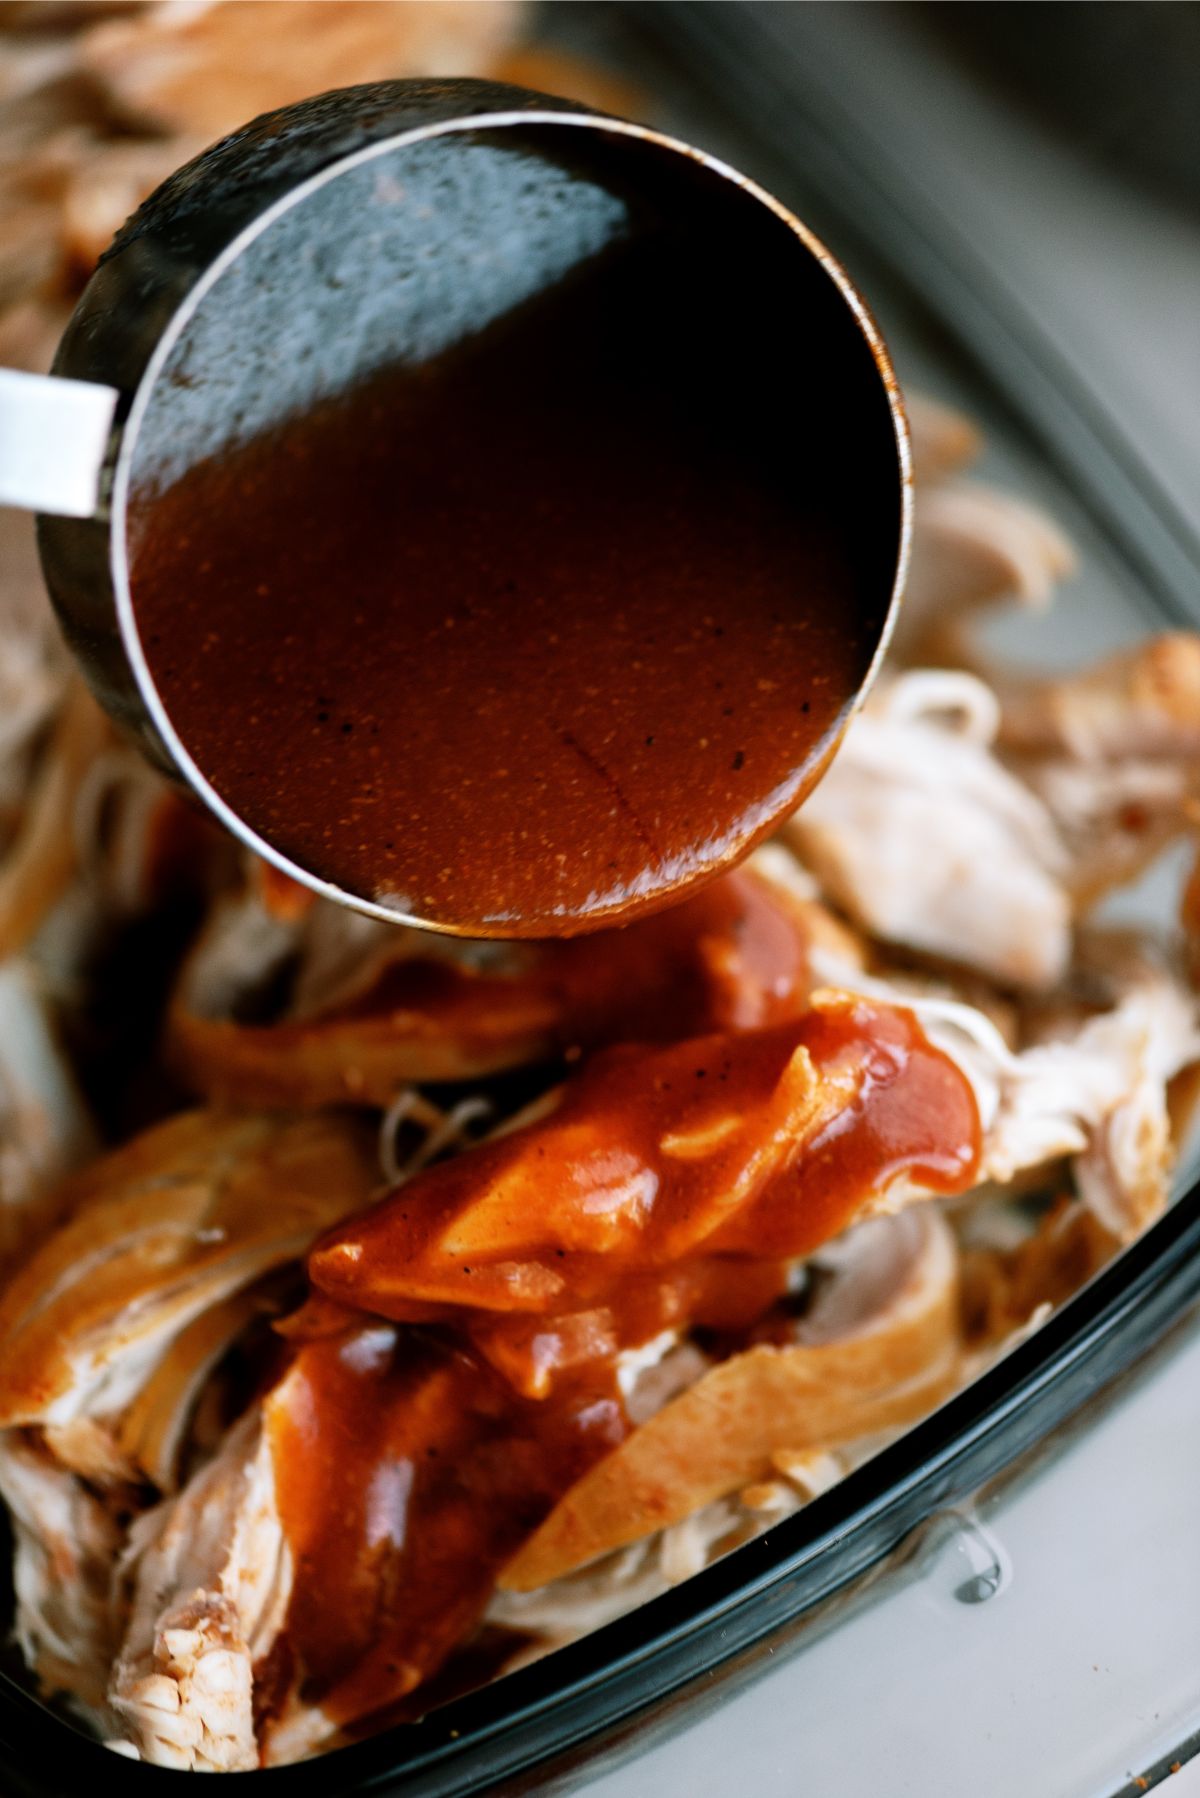 Pouring sauce on top of chicken